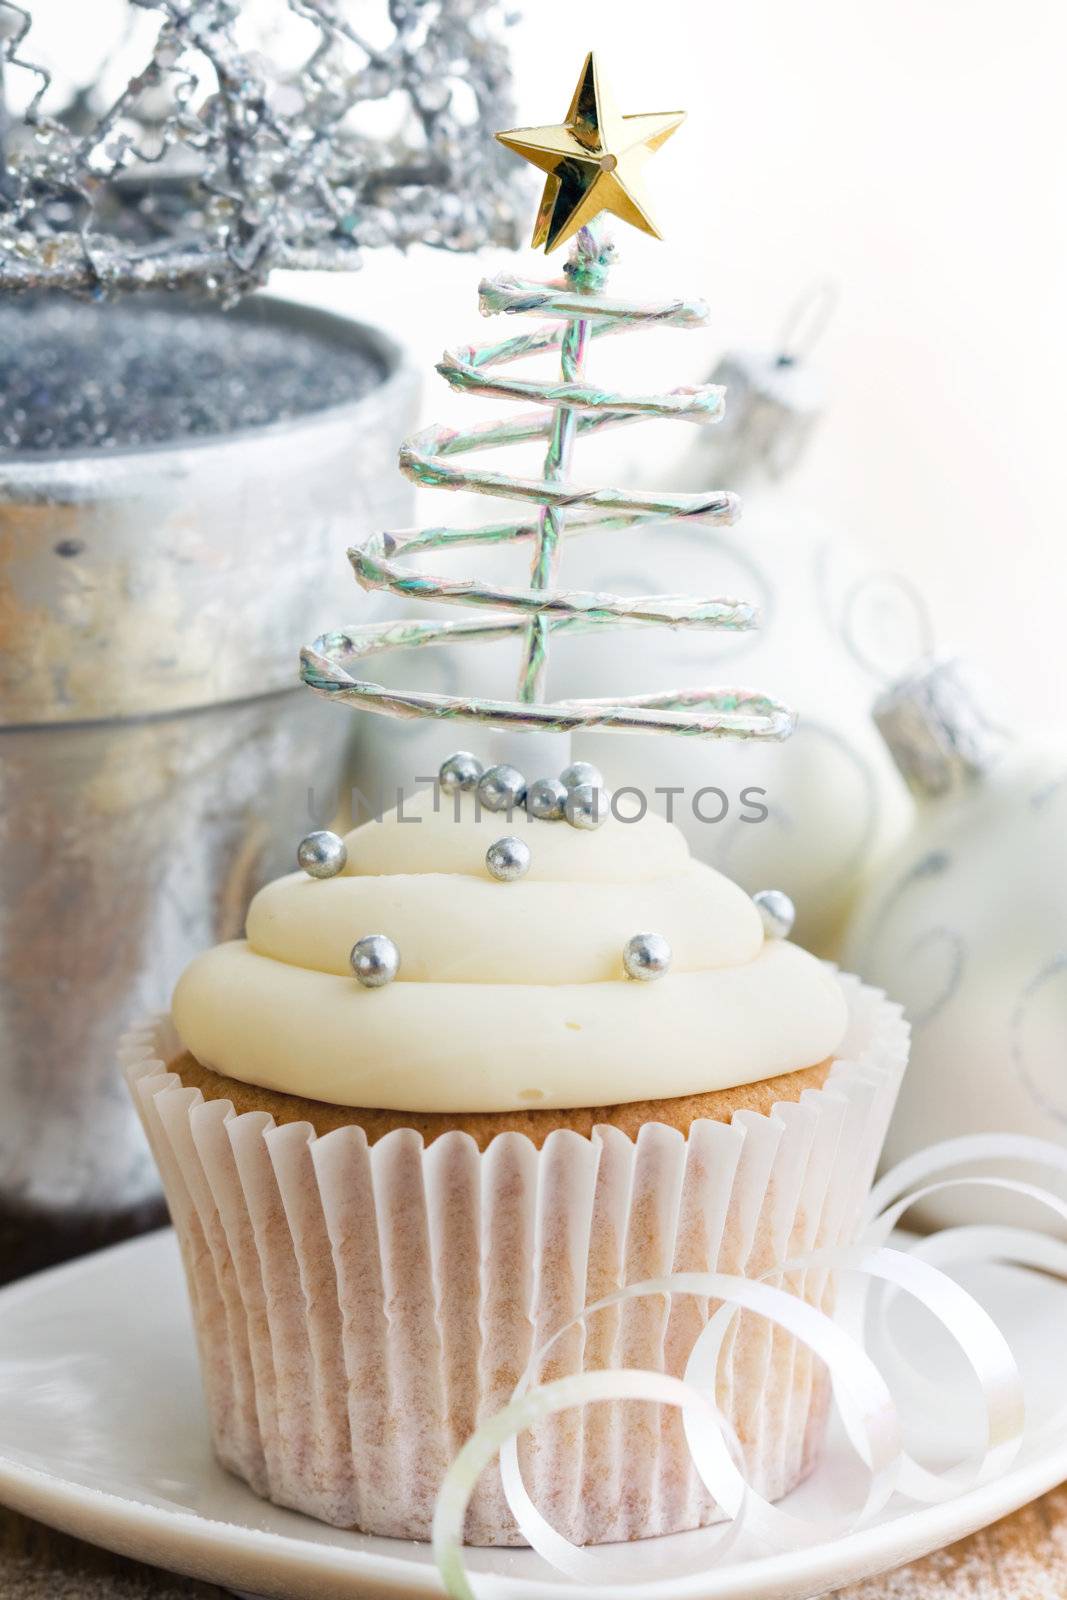 Cupcake decorated with silver dragees and a spiral Christmas tree